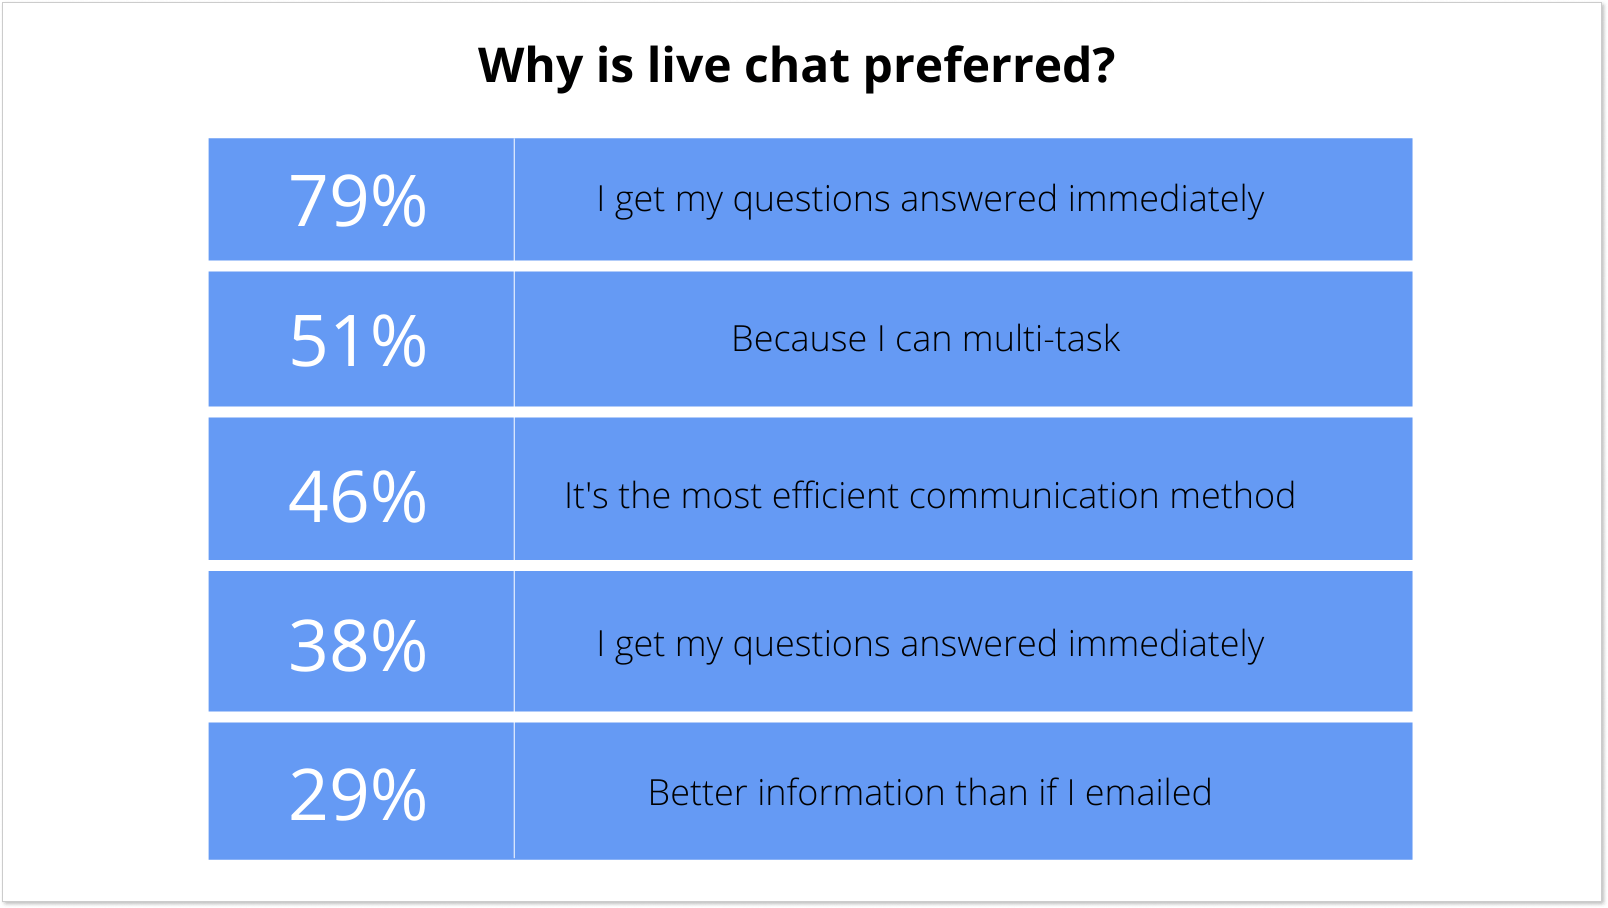 "Why is live chat preferred" by Econsultancy